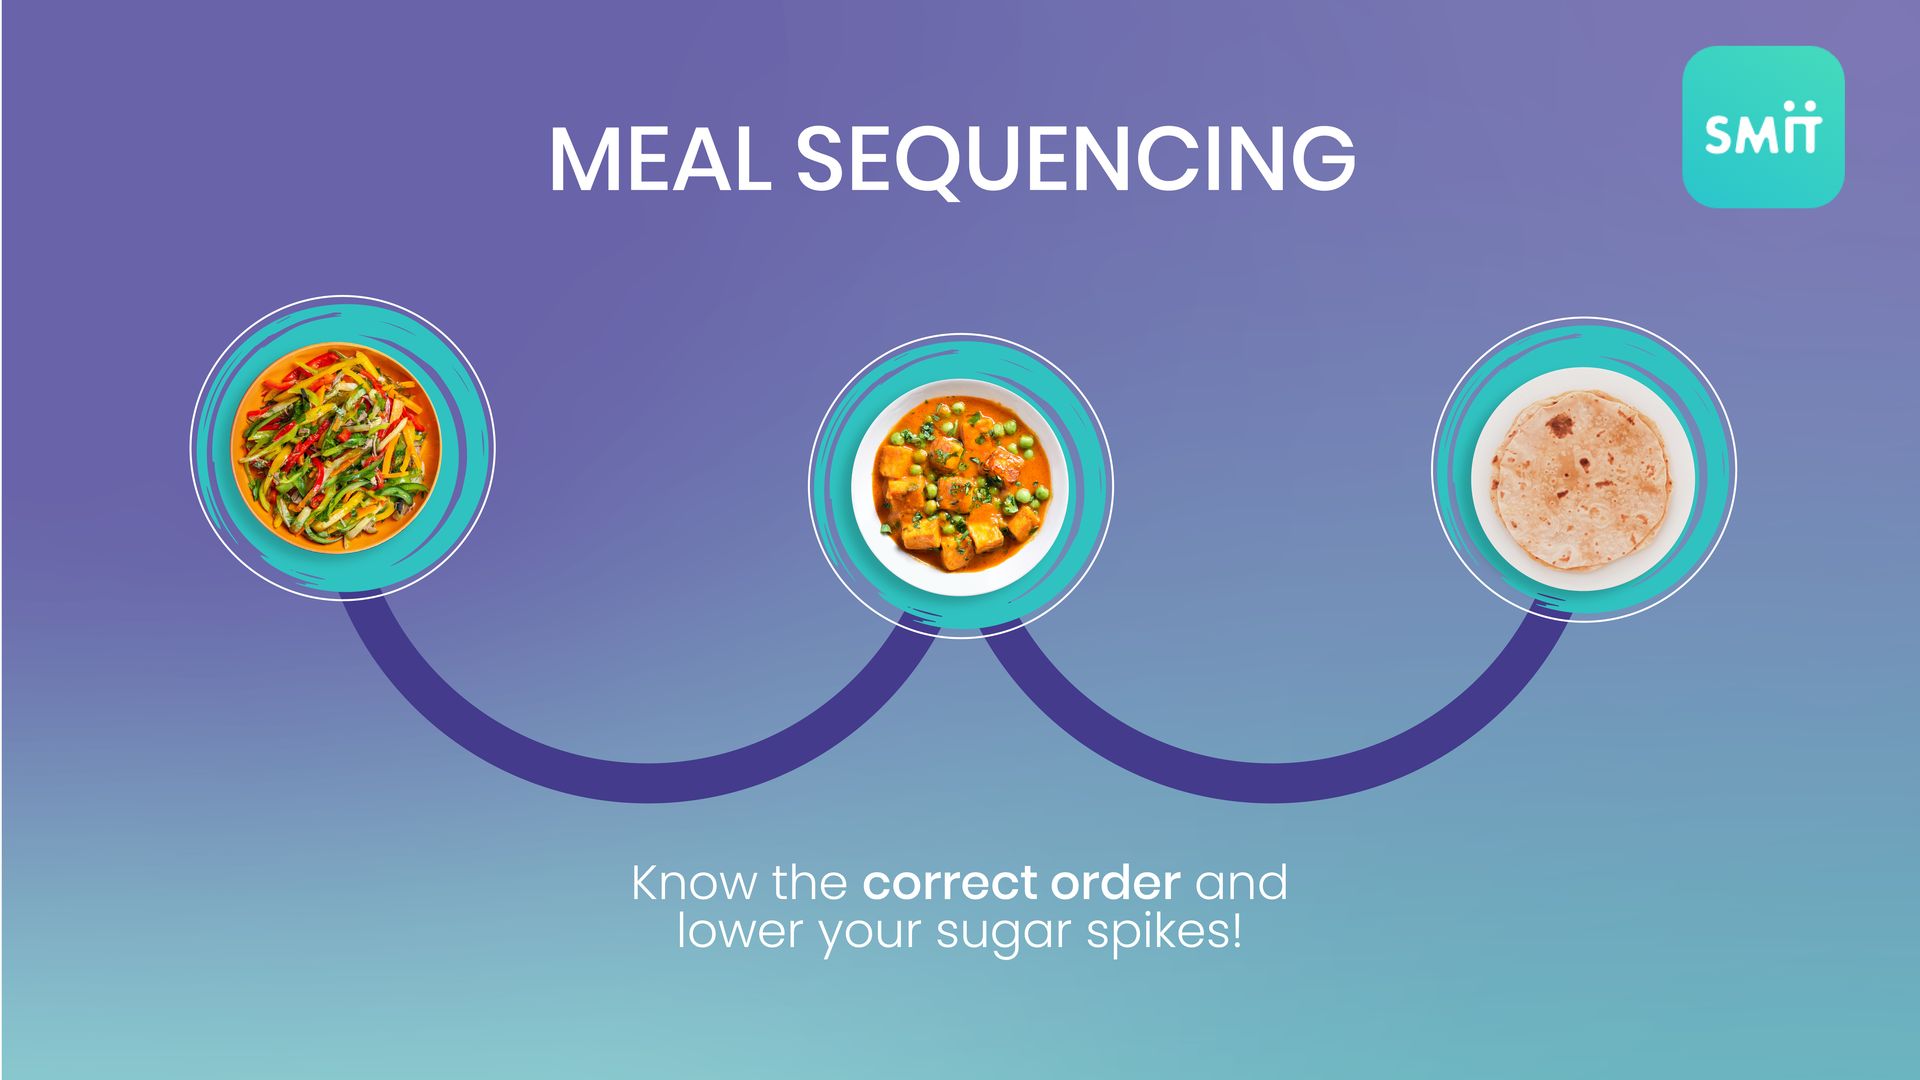 meal sequencing - image of food bowls